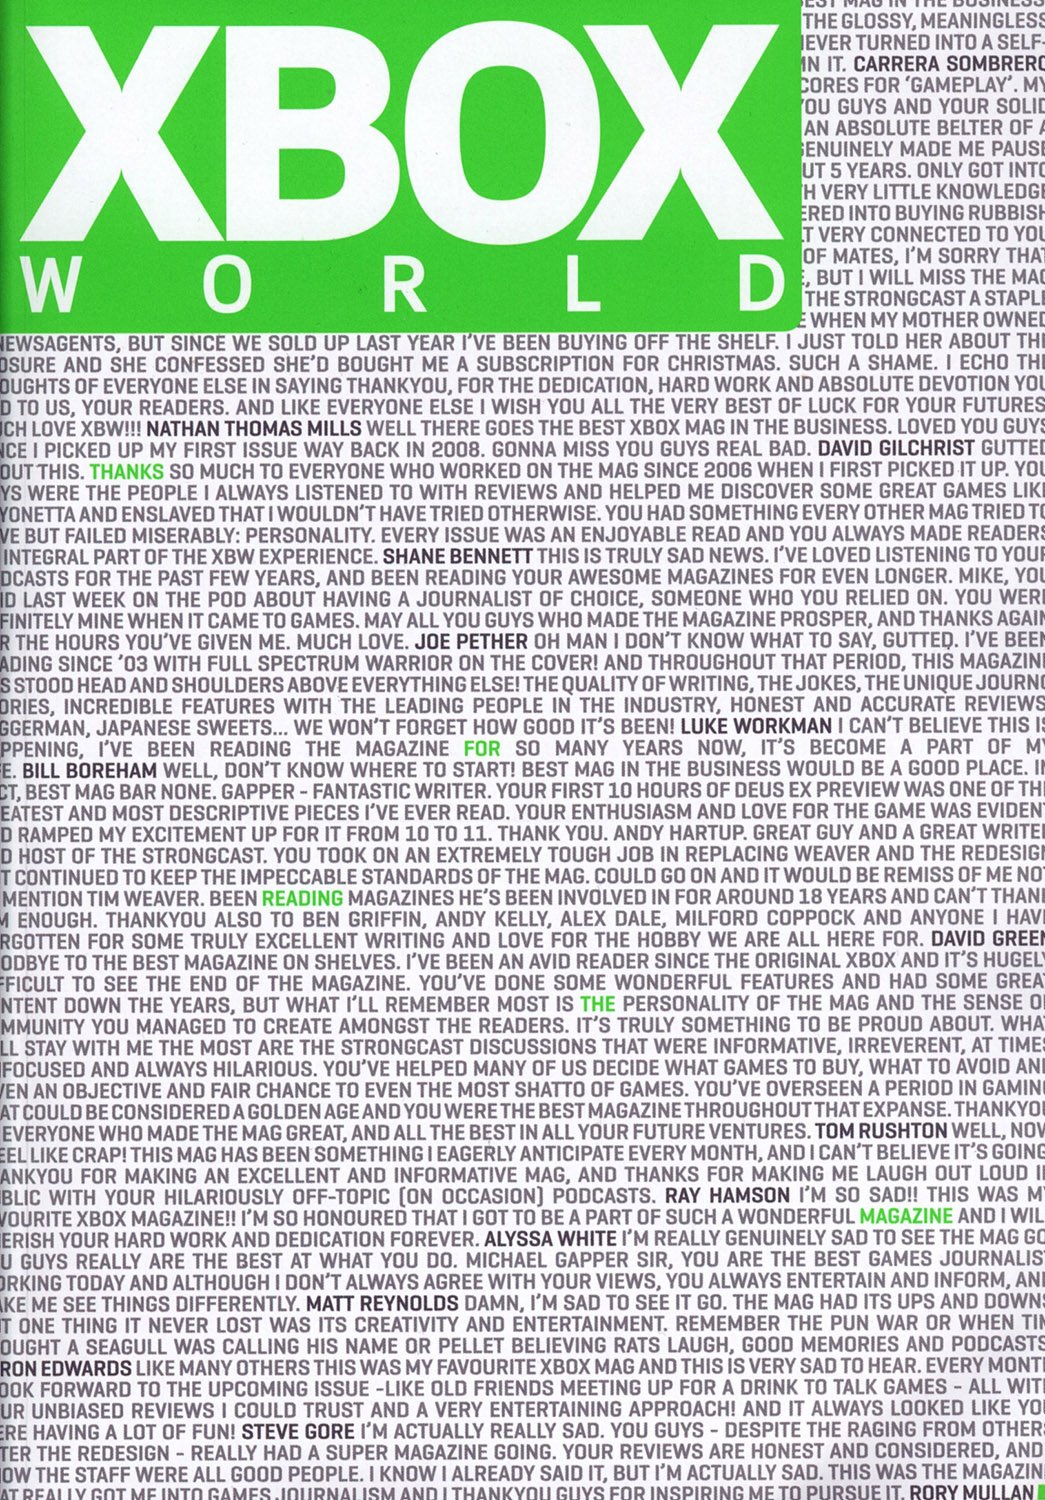 XBox World Issue 126 (subscriber cover) (February 2013)